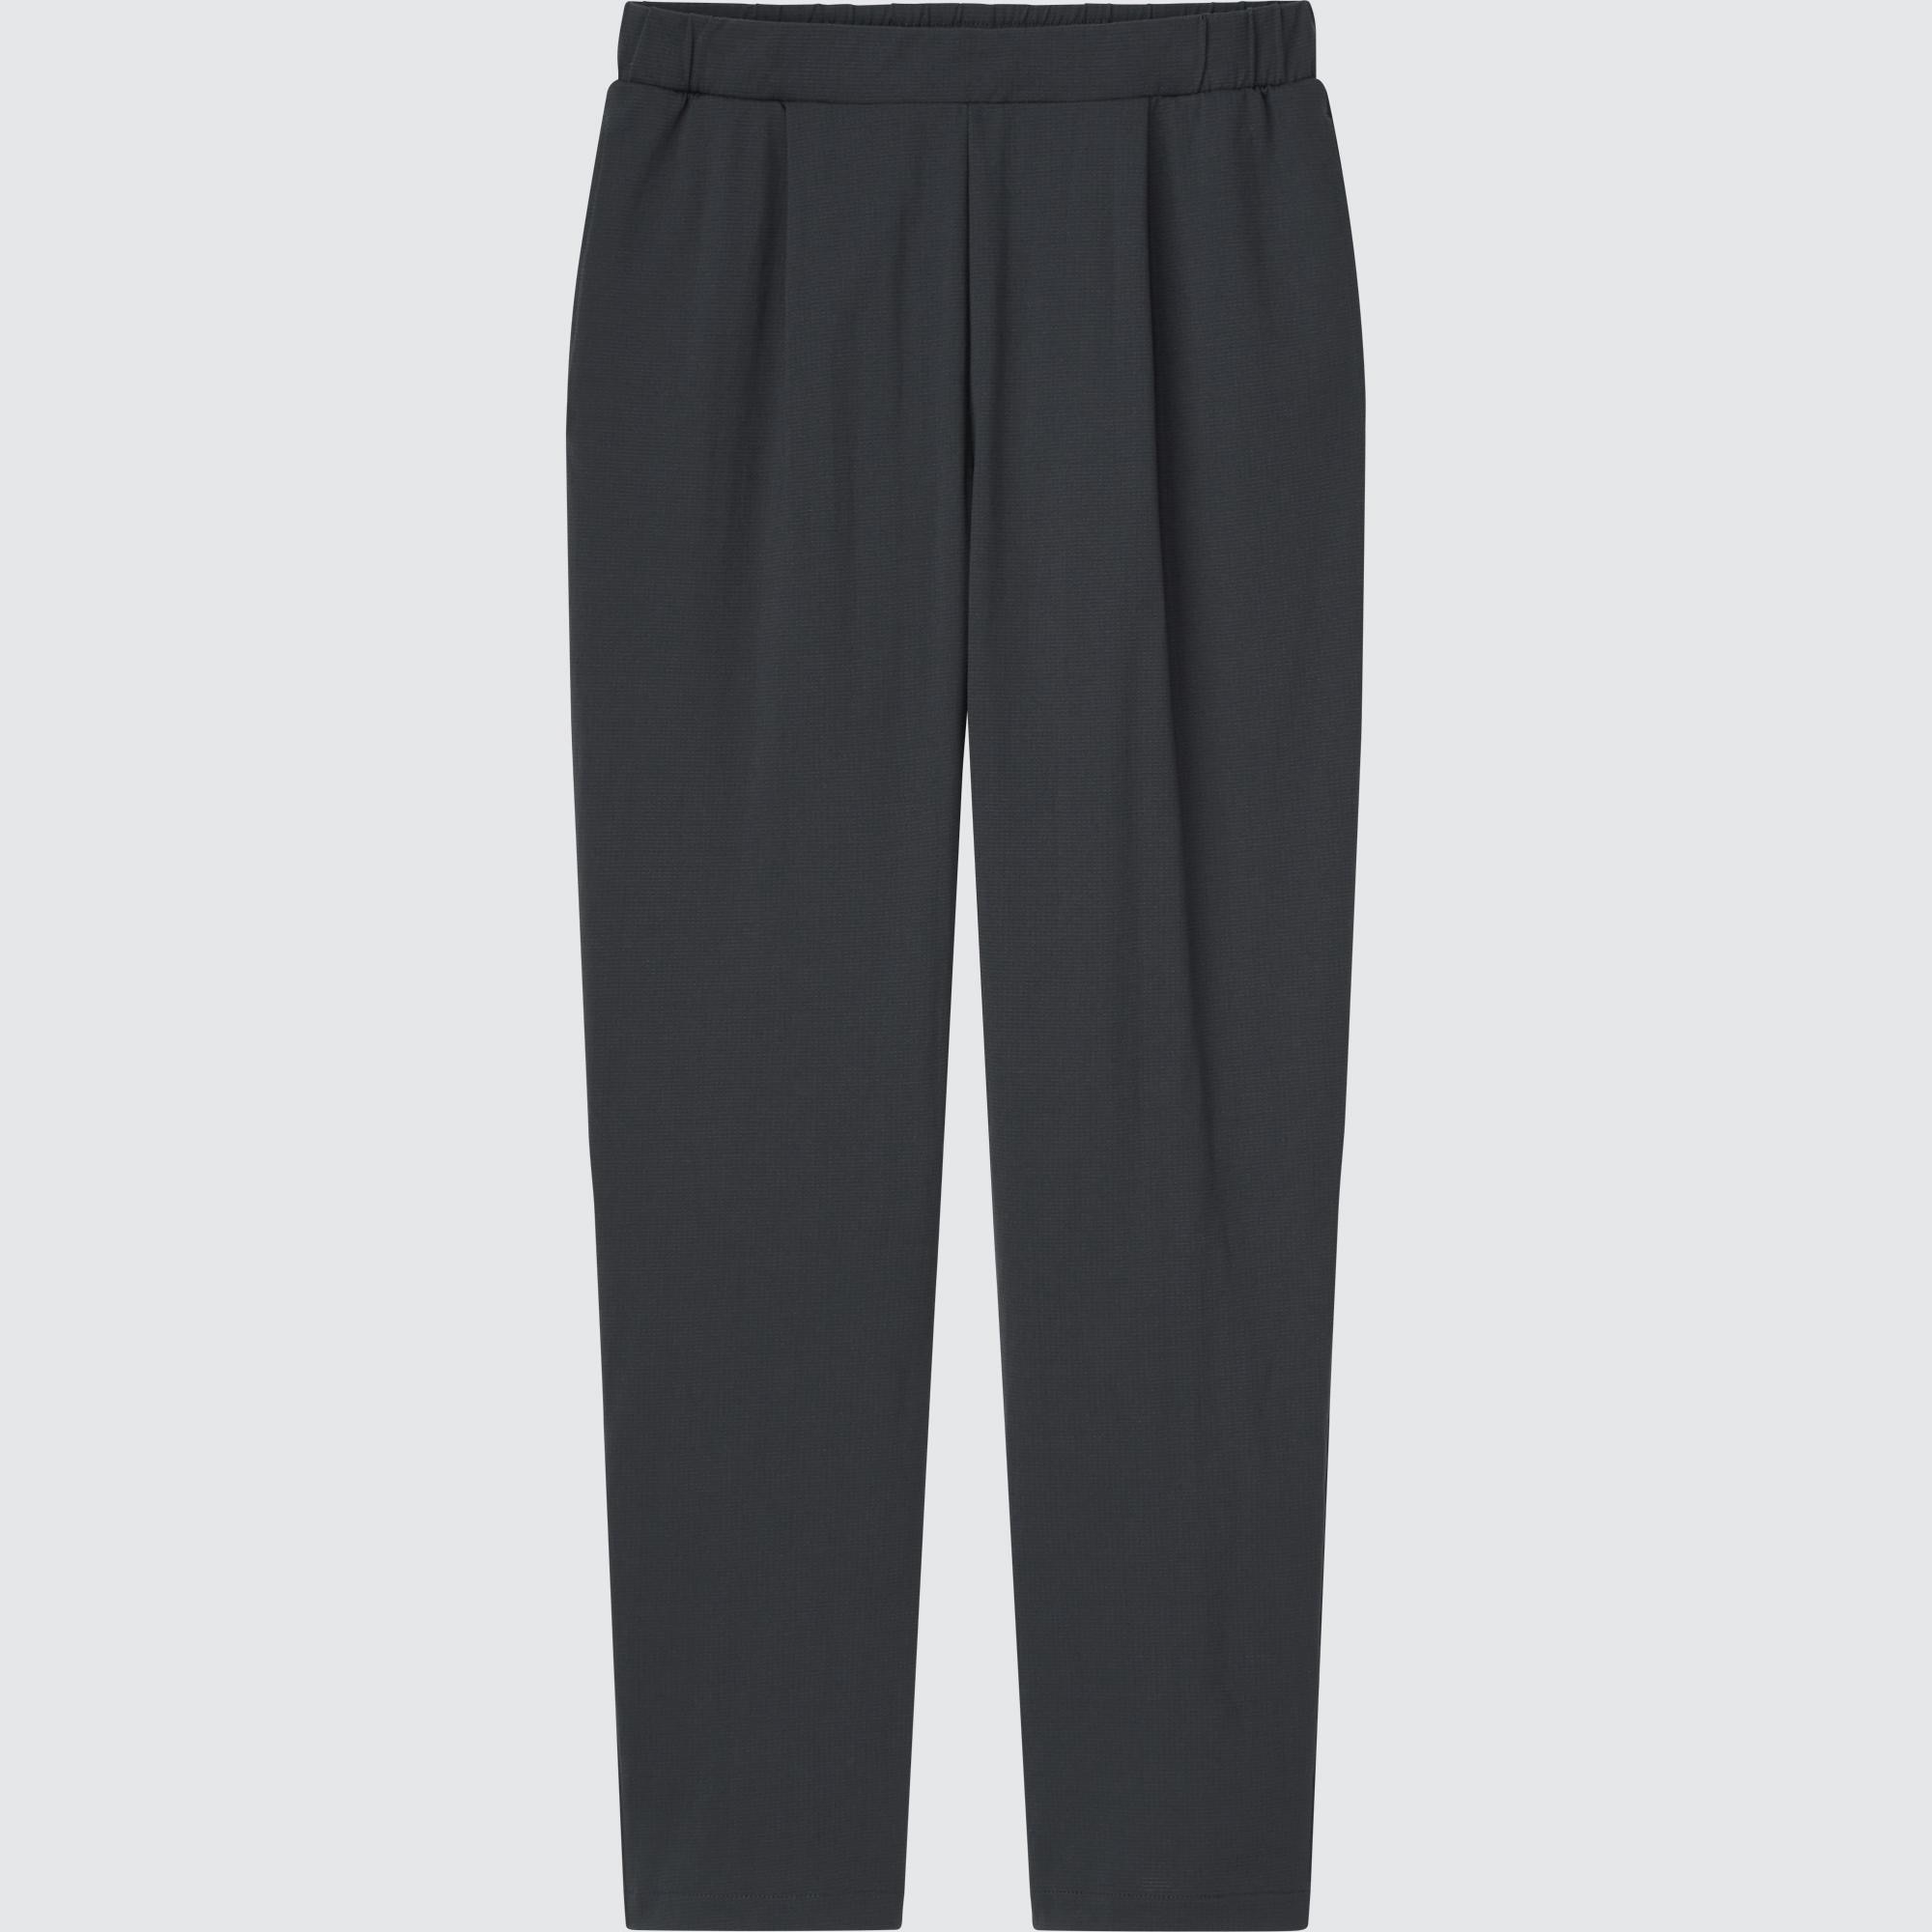 Uniqlo Ultra Stretch Active Tapered Pants, Men's Fashion, Bottoms